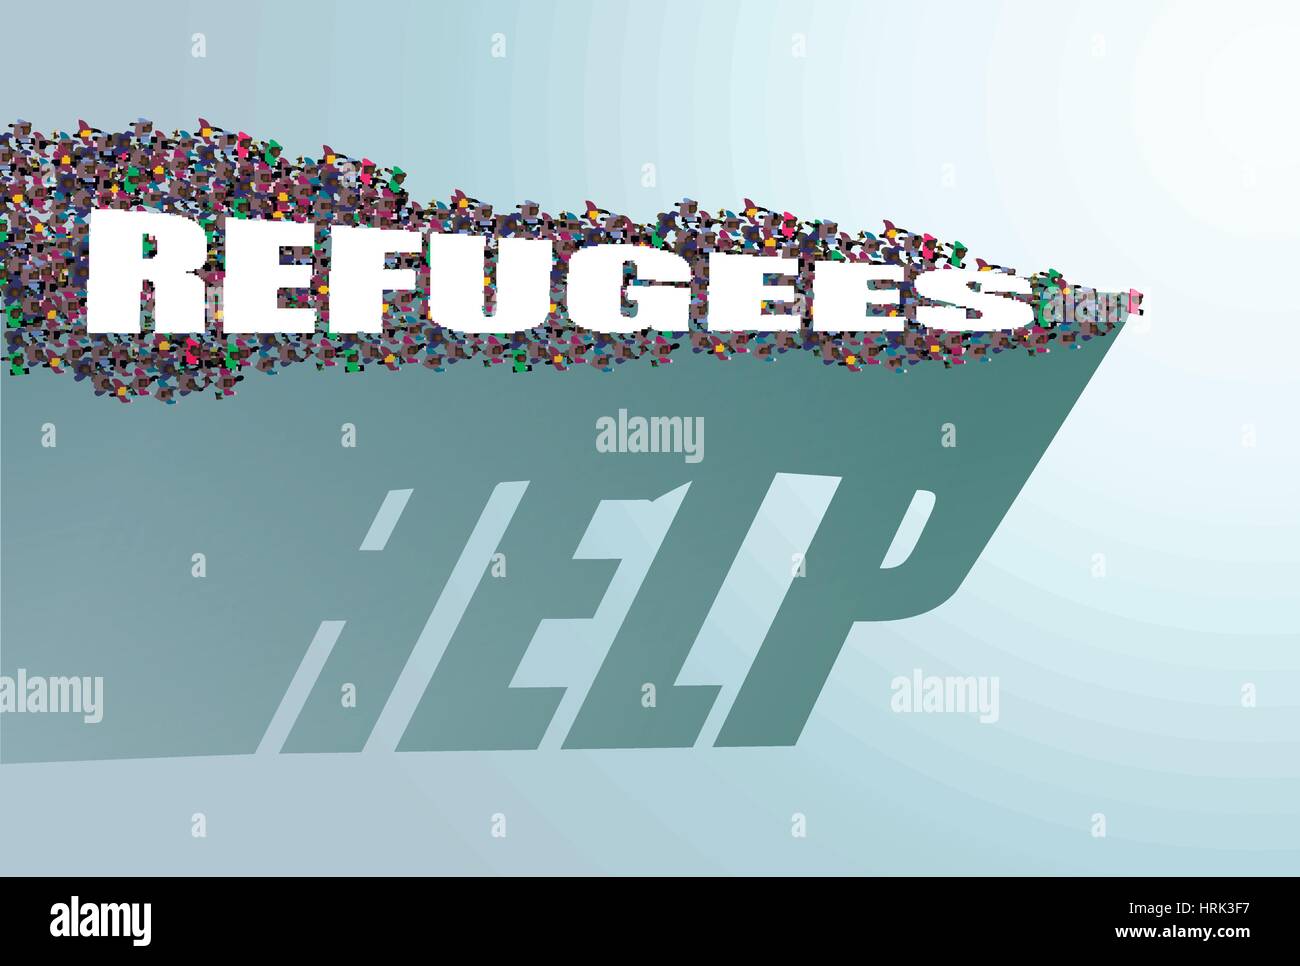 Refugees need help. The shadow falls from the crowds help Stock Vector